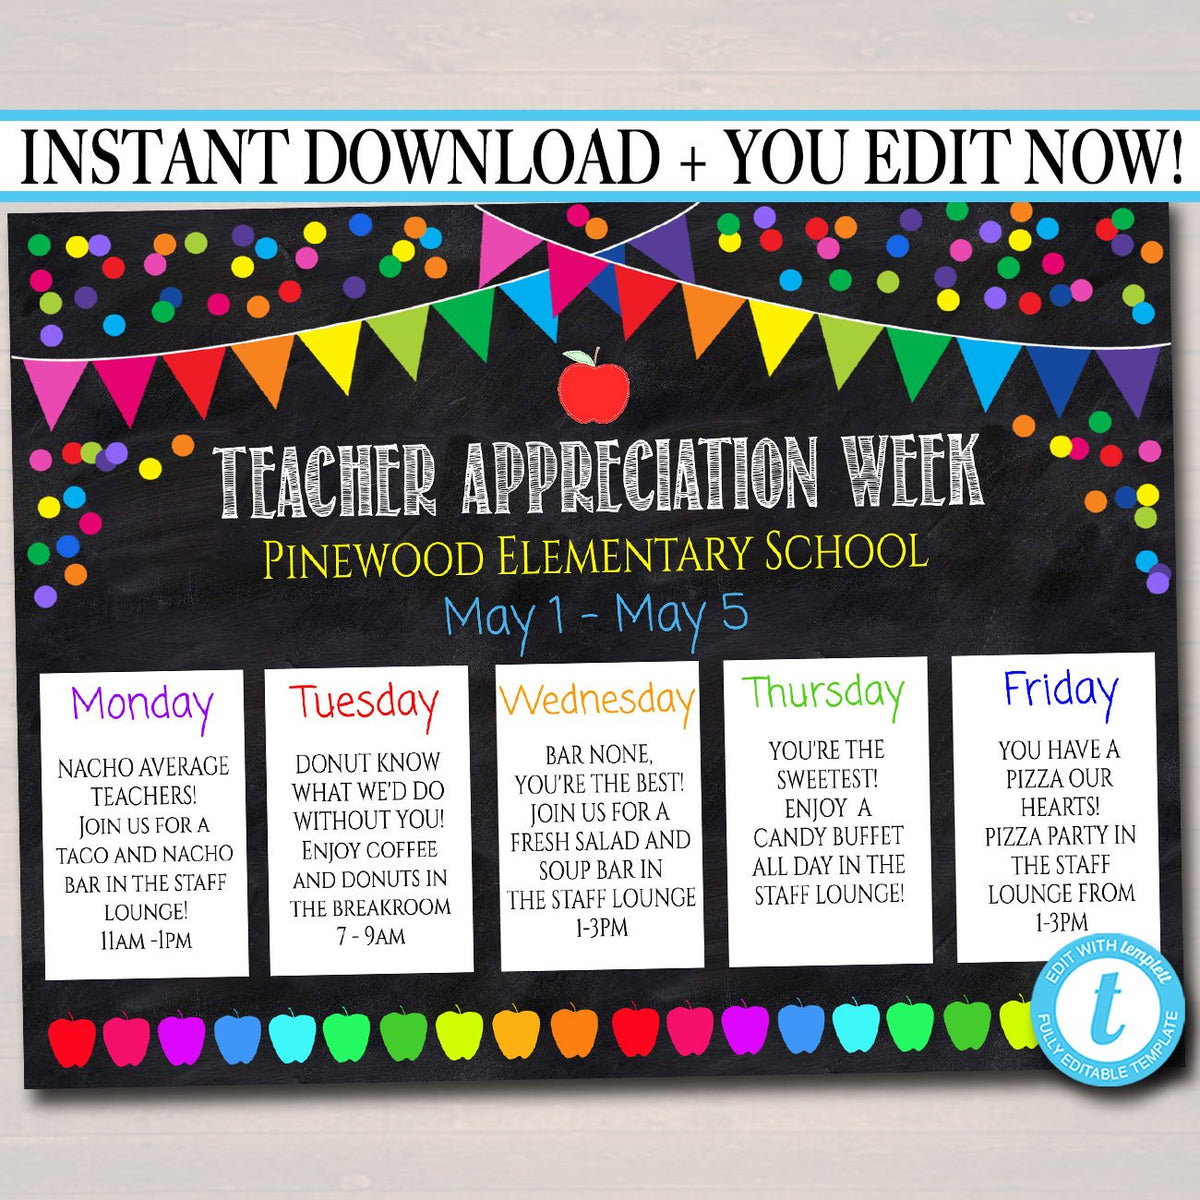 Teacher Staff Appreciation Week Itinerary Events Printable TidyLady